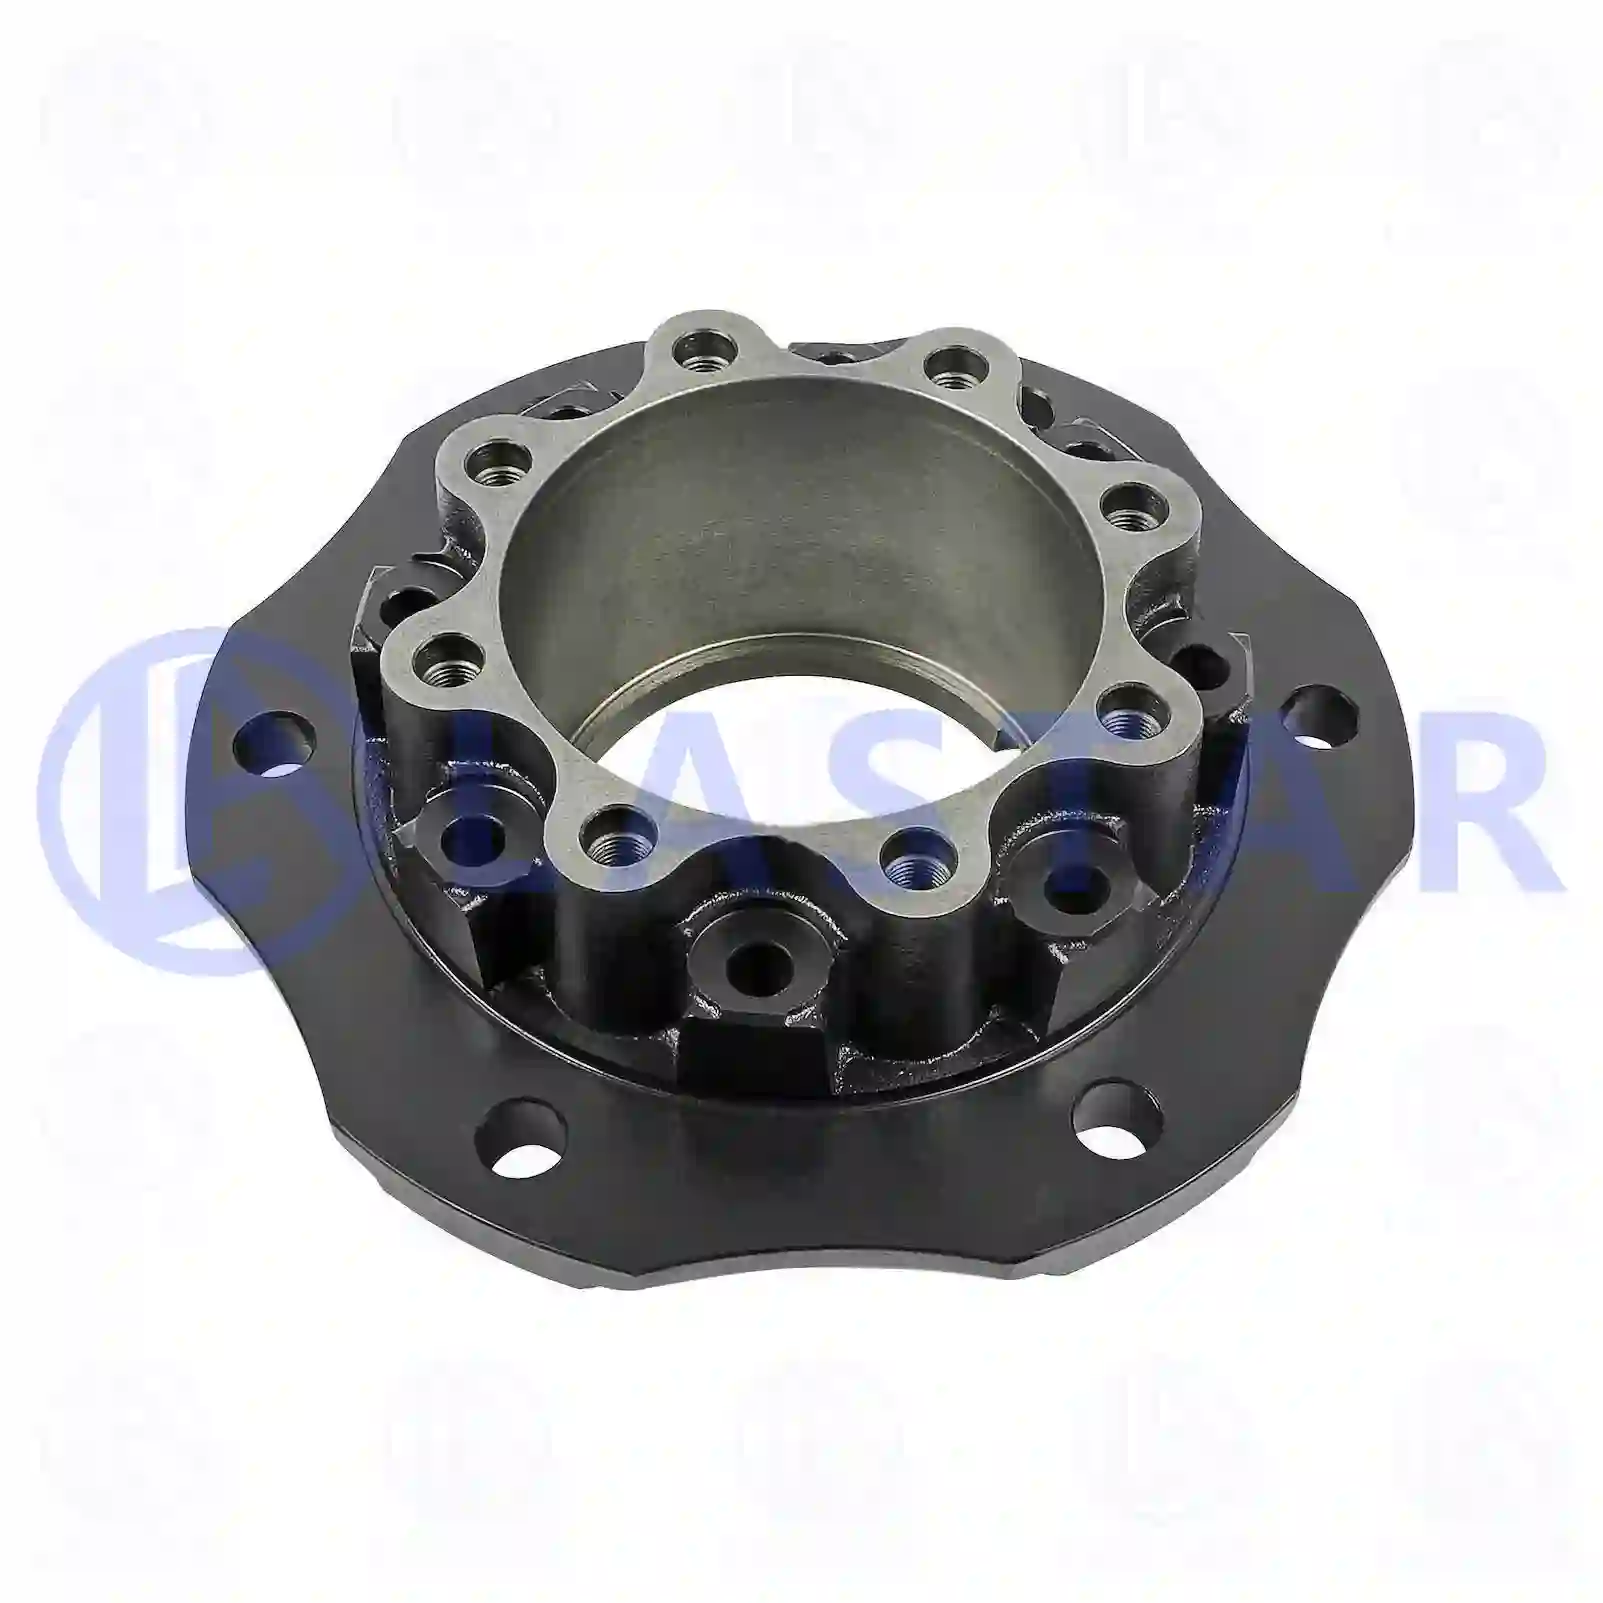 Wheel hub, without bearings, 77726392, 9703500335, 9703560301, ZG30233-0008, , , ||  77726392 Lastar Spare Part | Truck Spare Parts, Auotomotive Spare Parts Wheel hub, without bearings, 77726392, 9703500335, 9703560301, ZG30233-0008, , , ||  77726392 Lastar Spare Part | Truck Spare Parts, Auotomotive Spare Parts